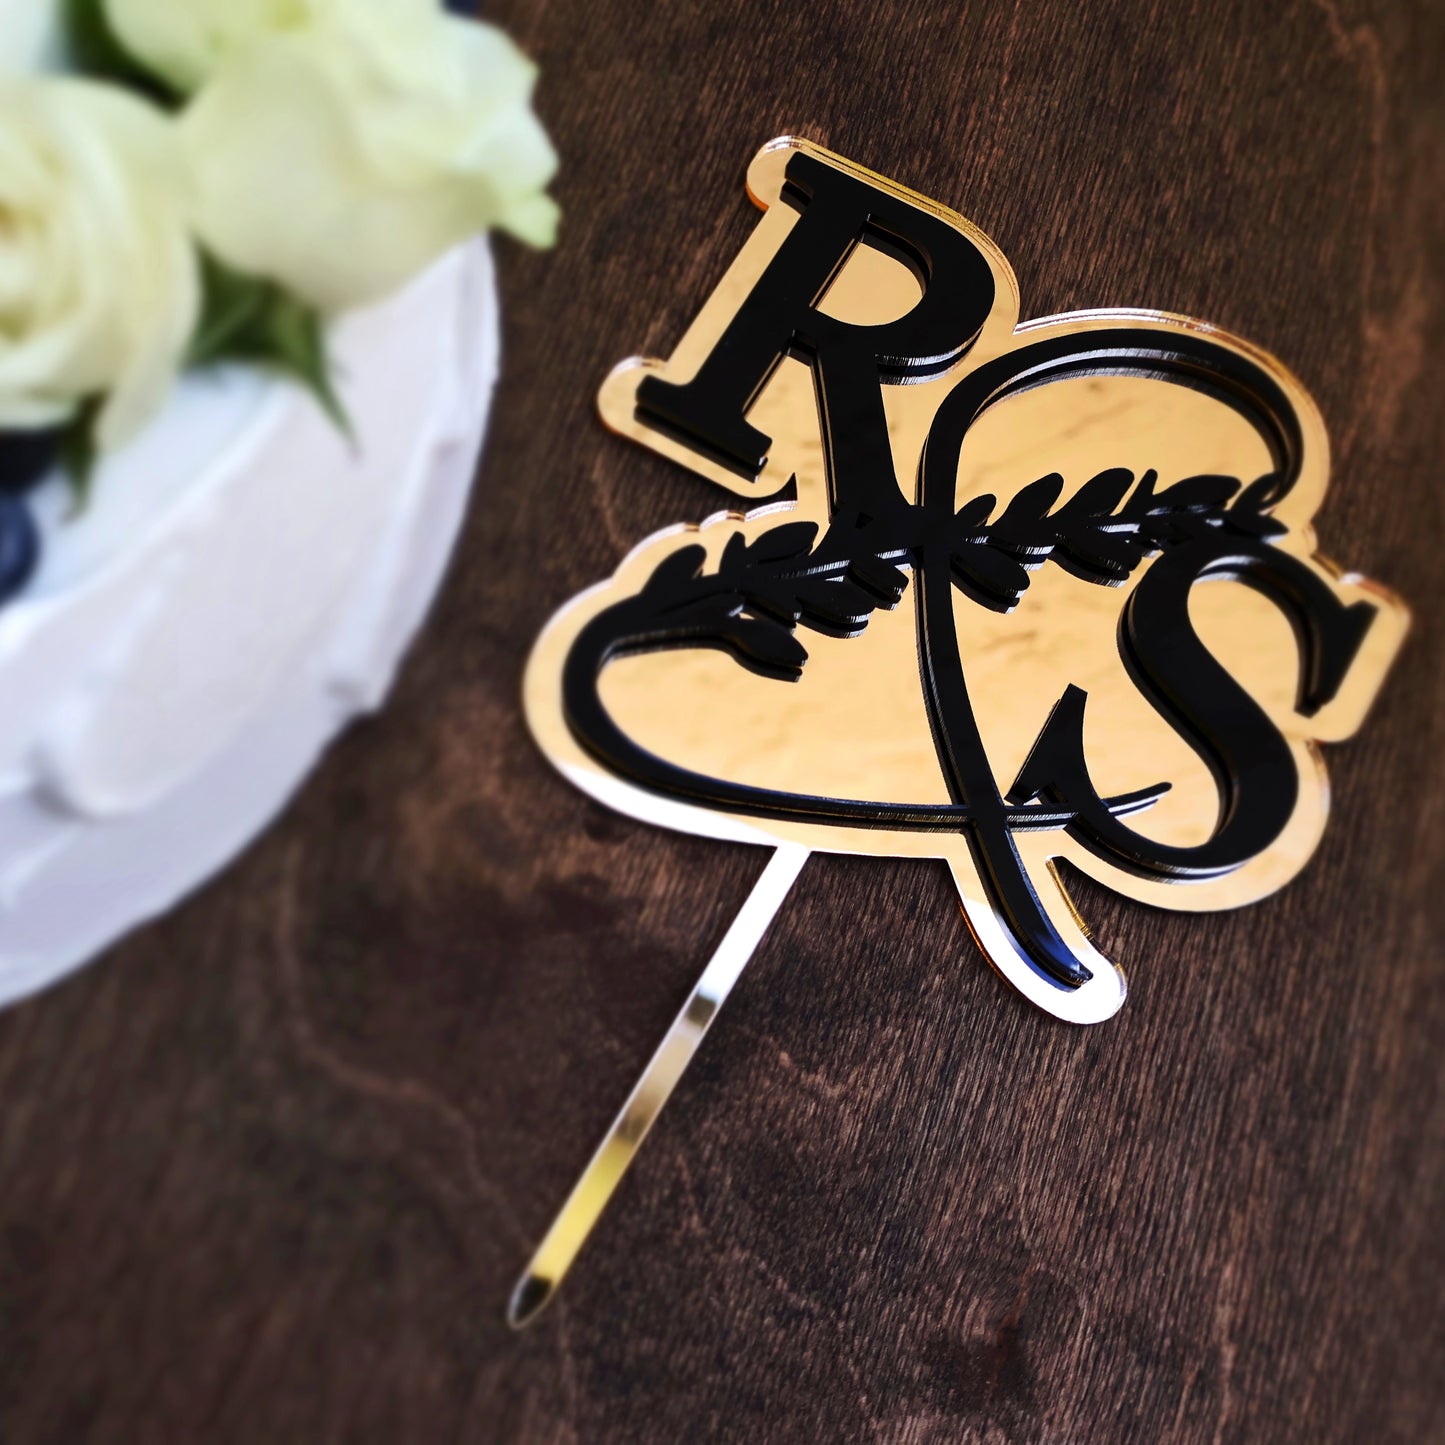 Double layer acrylic wedding cake topper mirrored gold and black custom cake toppers wedding personalized birthday acrylic cake toppers modern last name cake decor initials monogram ampersand